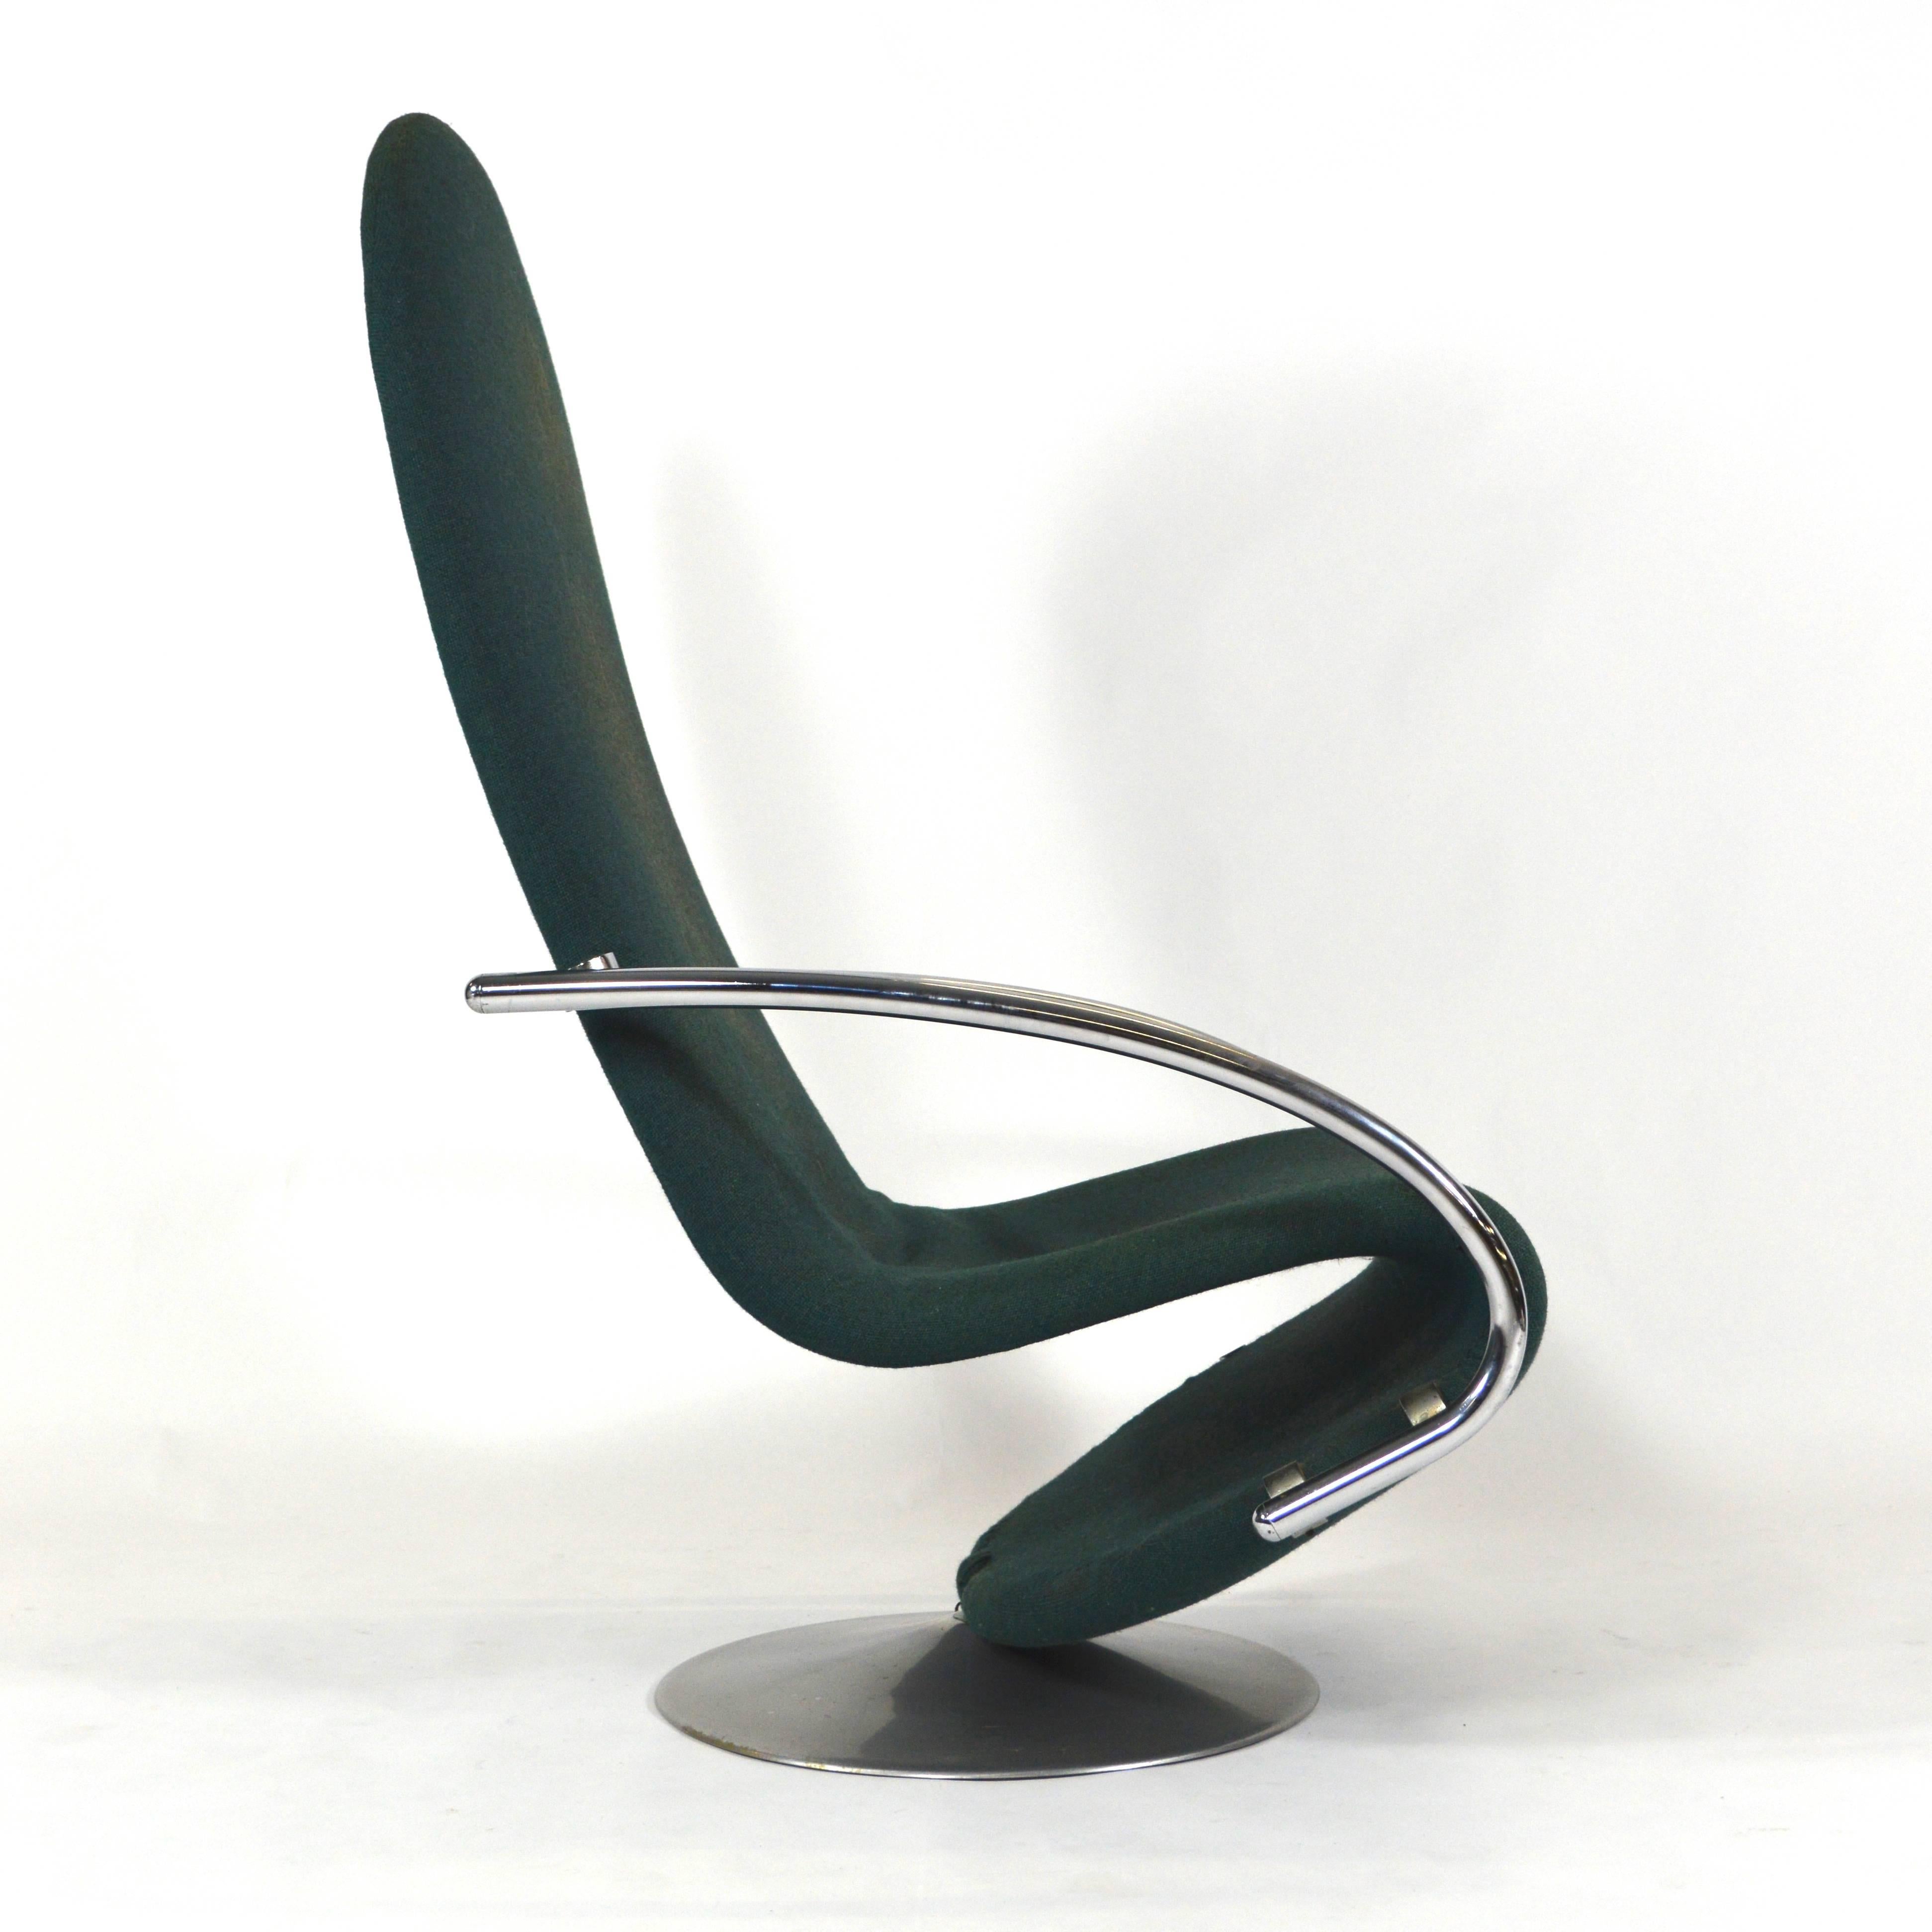 Early edition Verner Panton 123 System swivel chair.
Chromed base with original green fabric.
The fabric shows signs of use and fading.